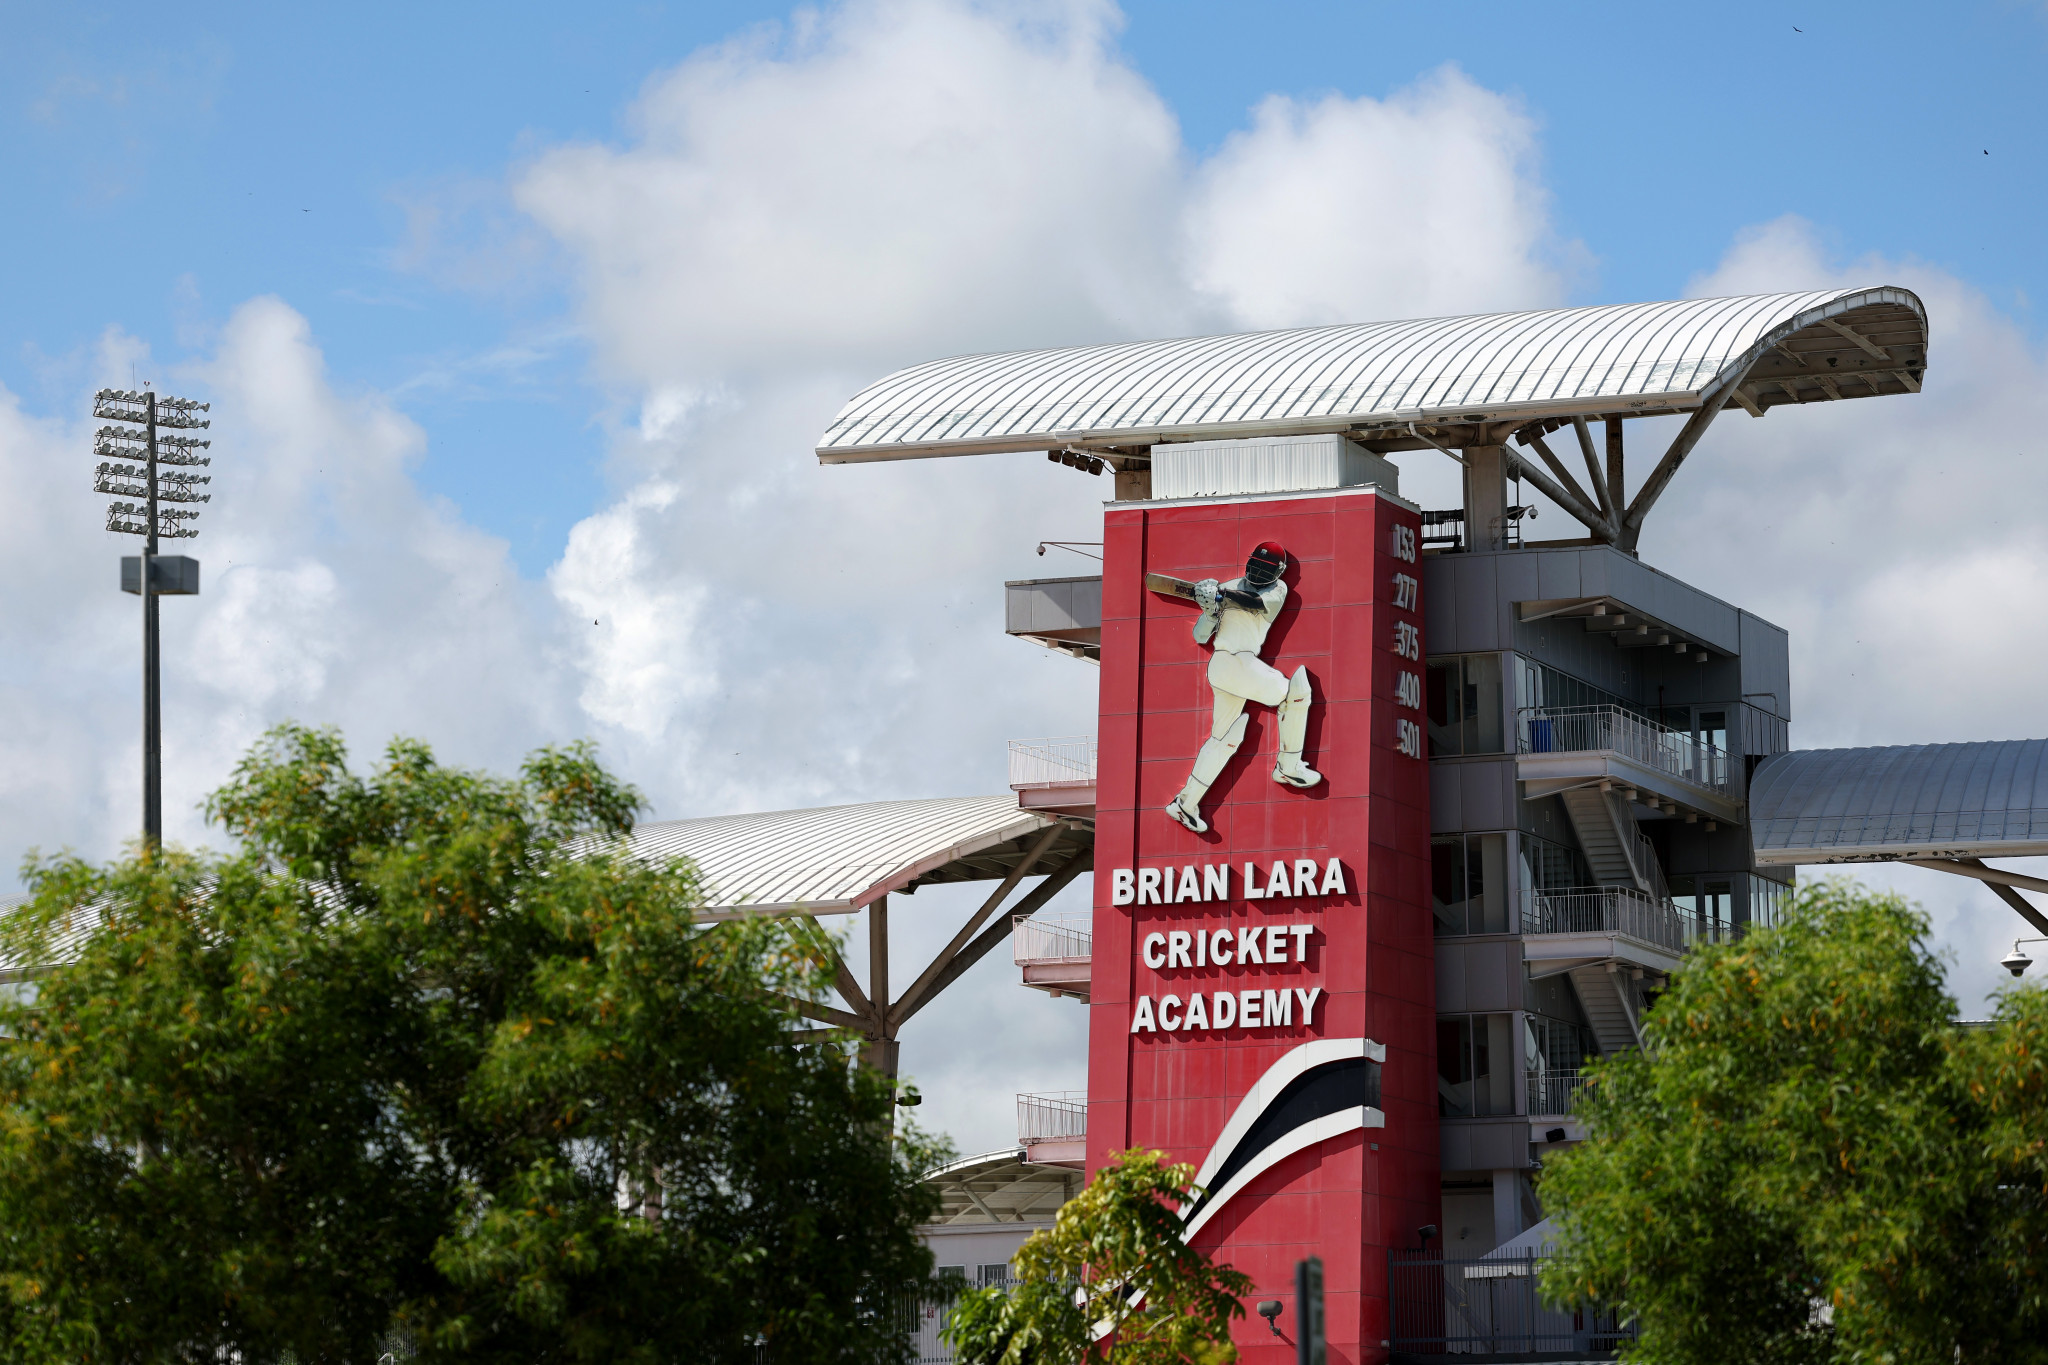 Brian Lara Cricket Academy hosts cycling on day one of competition at Trinbago 2023